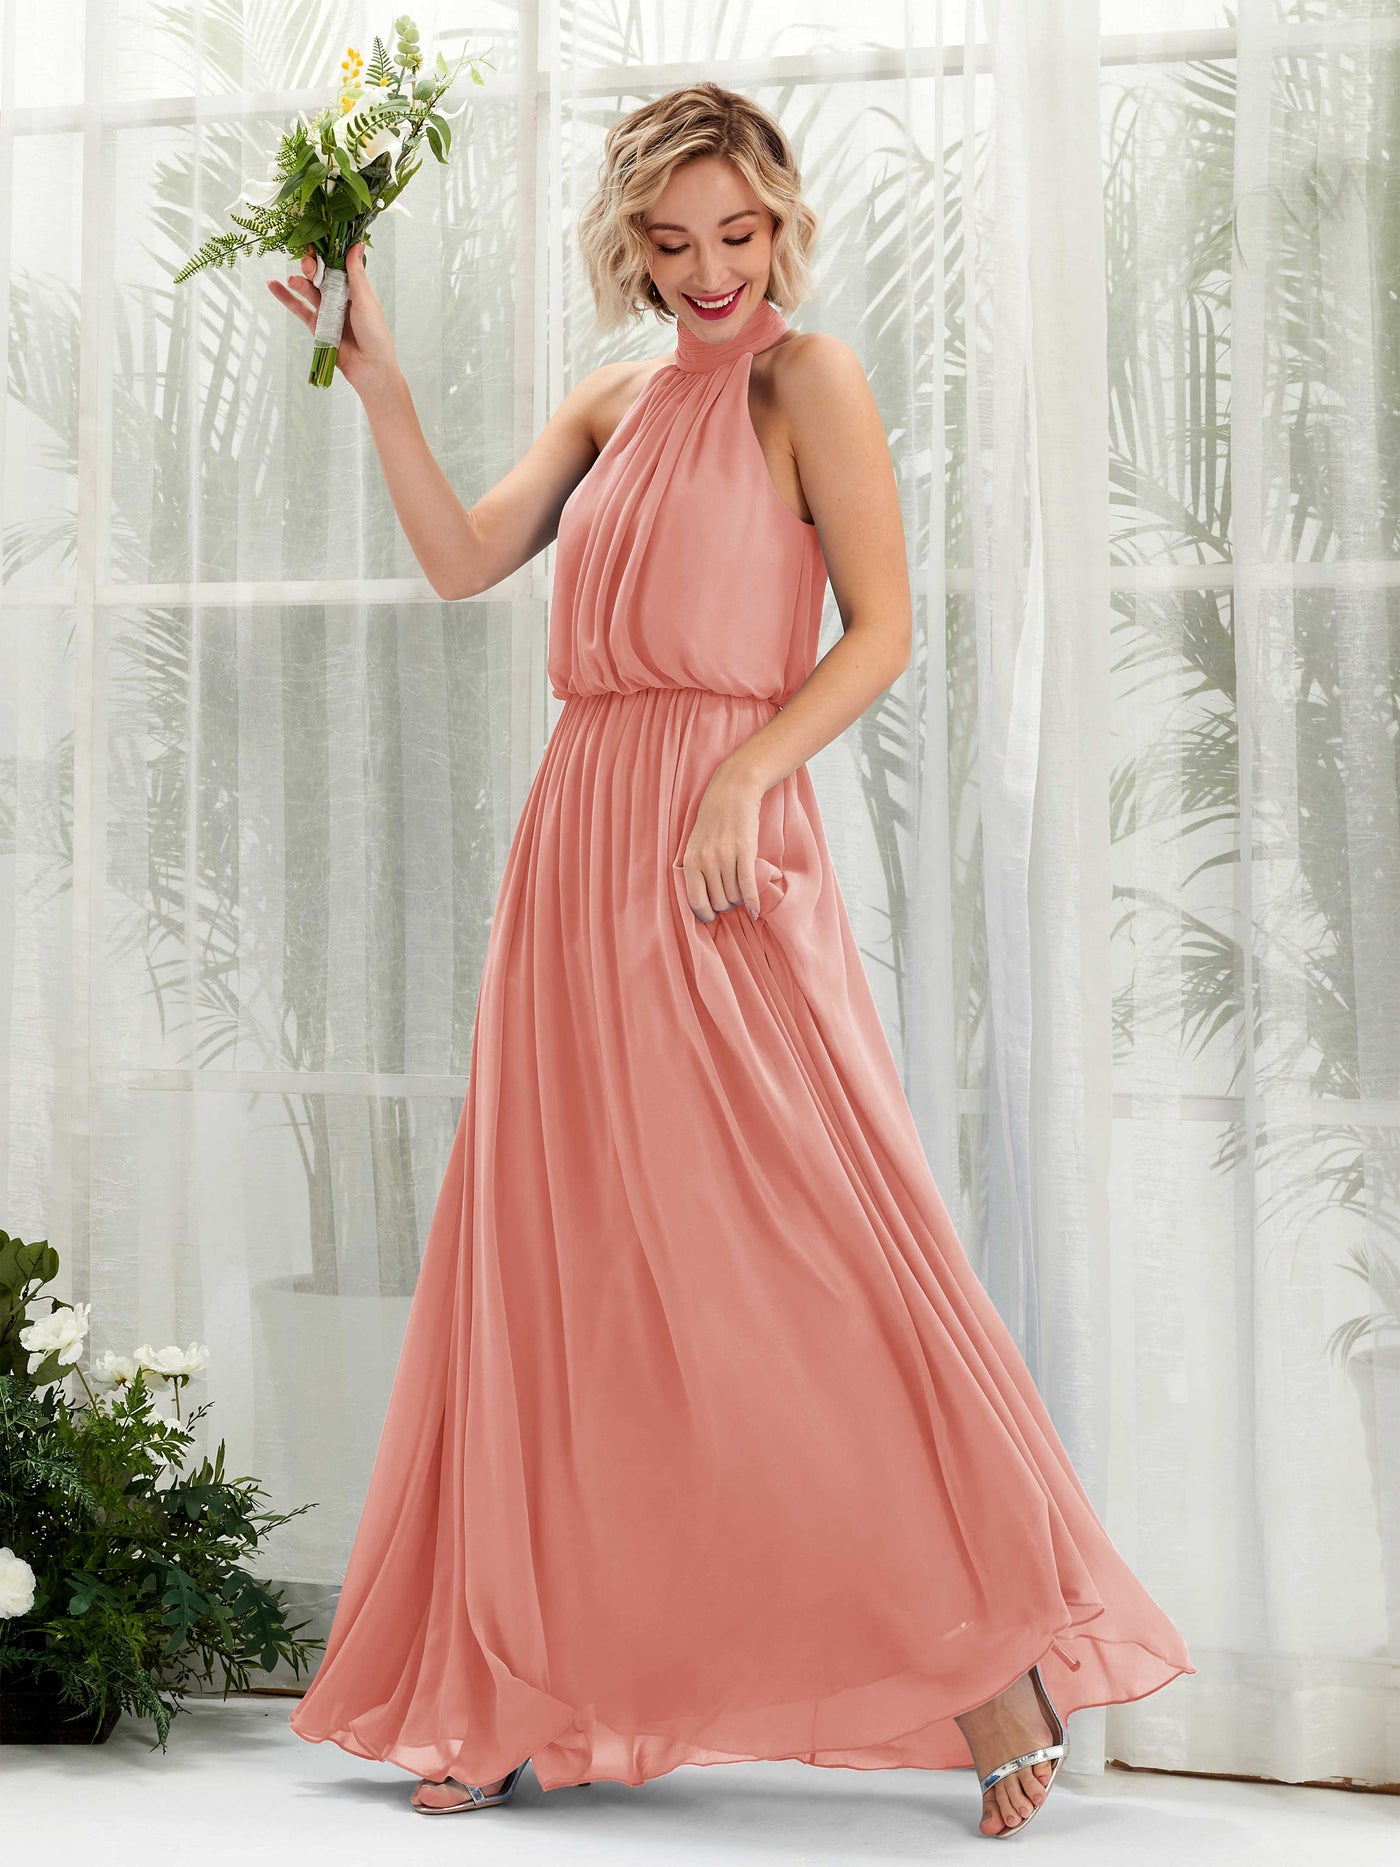 Champagne Rose Bridesmaid Dresses Bridesmaid Dress A-line Chiffon Halter Full Length Sleeveless Wedding Party Dress (81222906)#color_champagne-rose